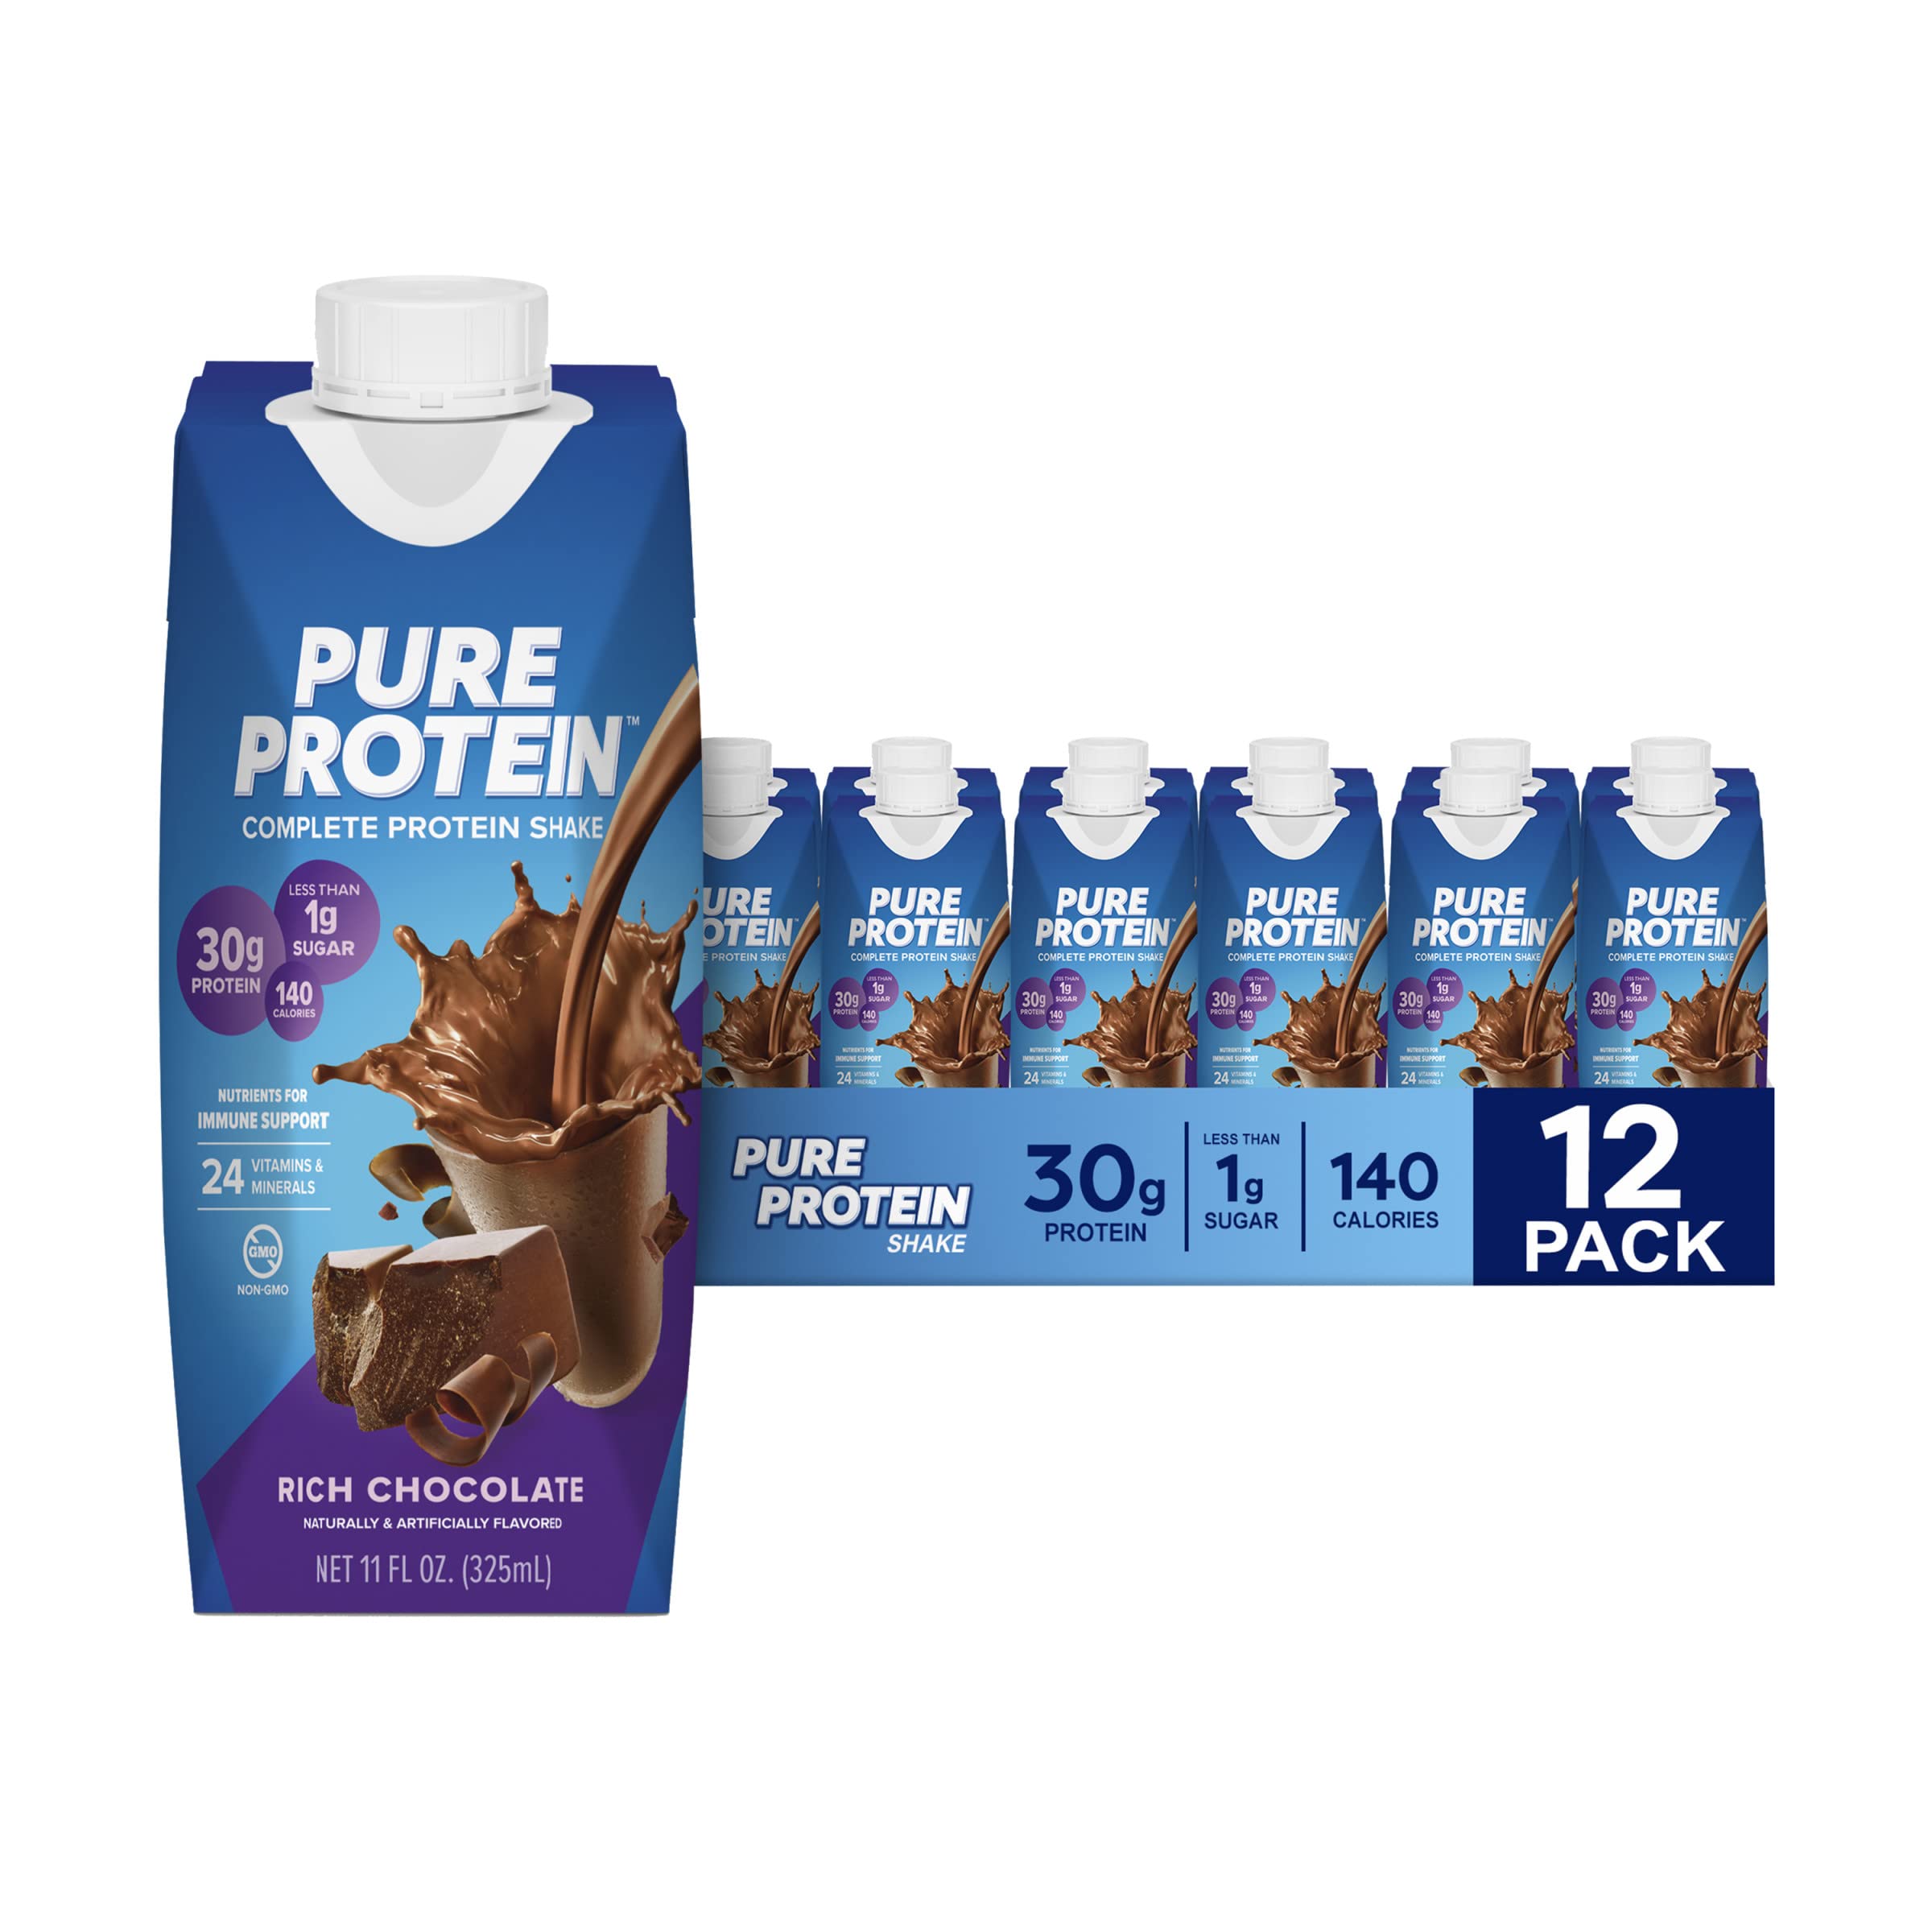 Pure Protein Chocolate Protein Shake, 30g Complete Protein, Ready to Drink and Keto-Friendly, Vitamins A, C, D, and E plus Zinc to Support Immune Health, 11oz Bottles, 12 Pack